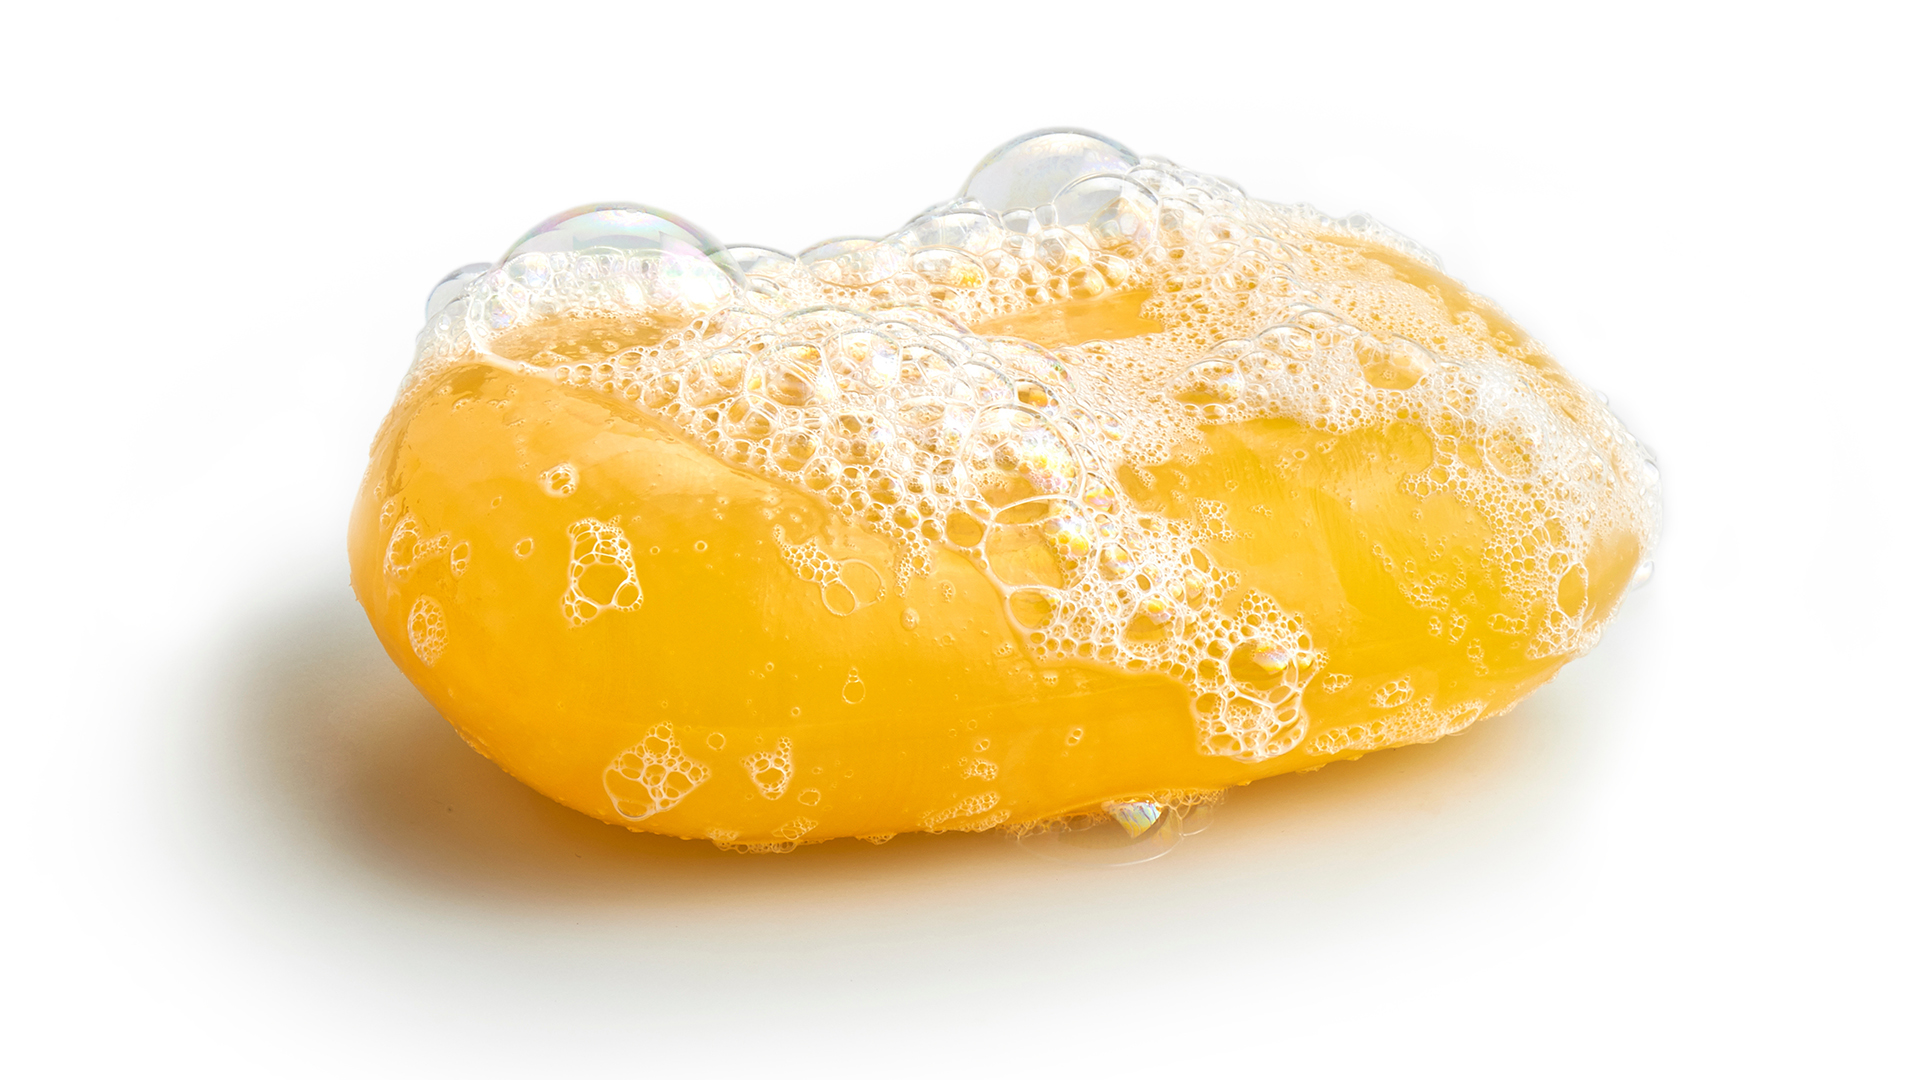 A foamy, yellow bar of soap against a white background